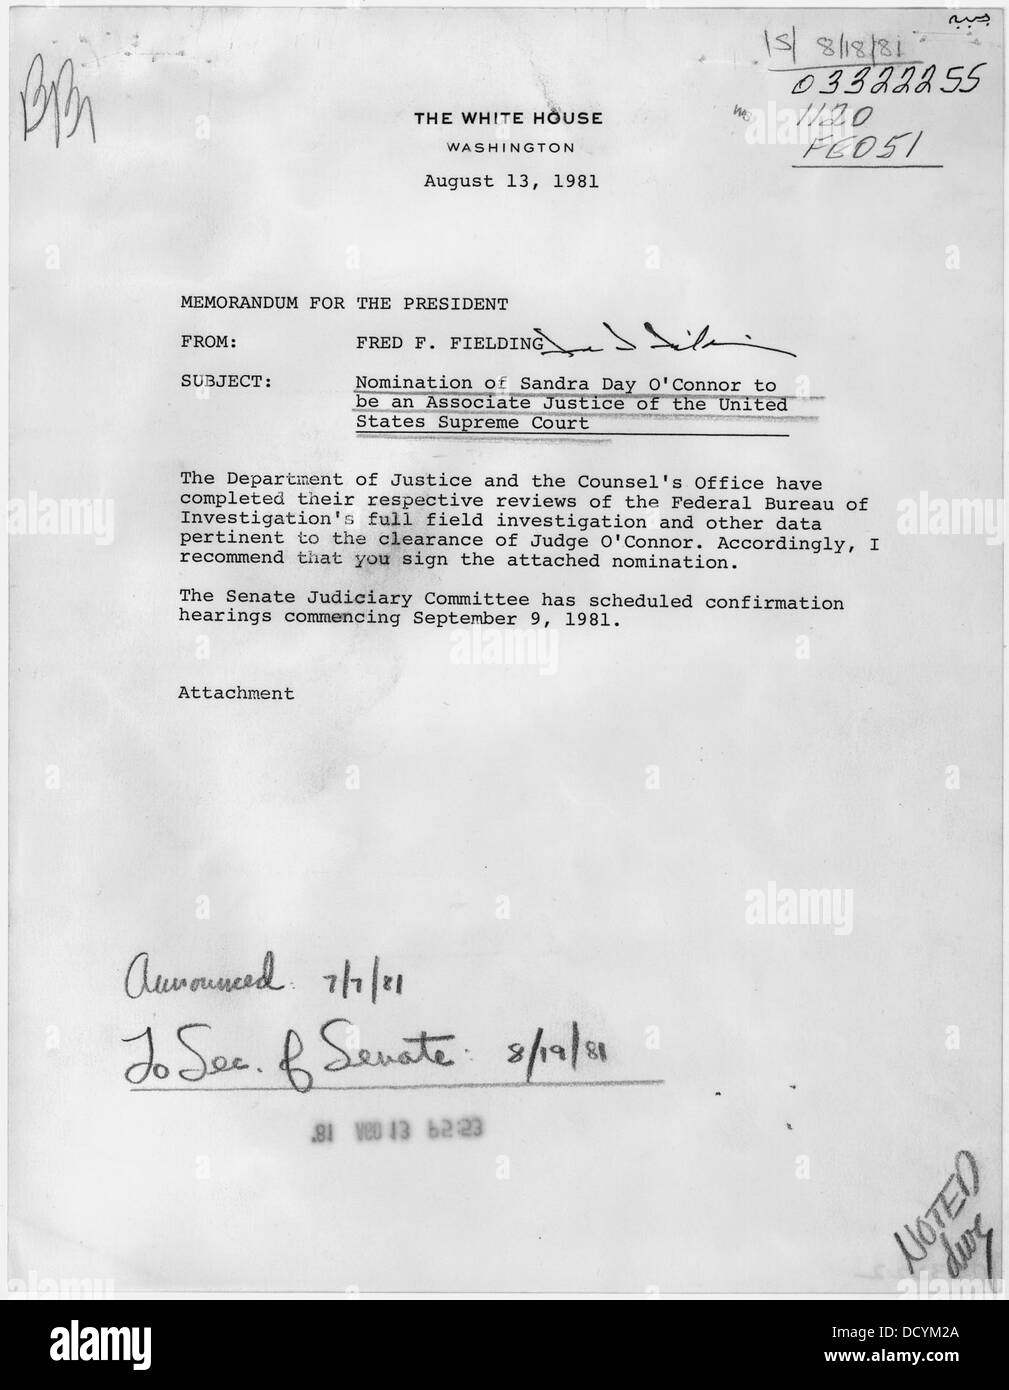 Memo from Fred Fielding to the President, re Nomination of Sandra Day O'Connor to be An Associate Justice of the... - - 198421 Stock Photo